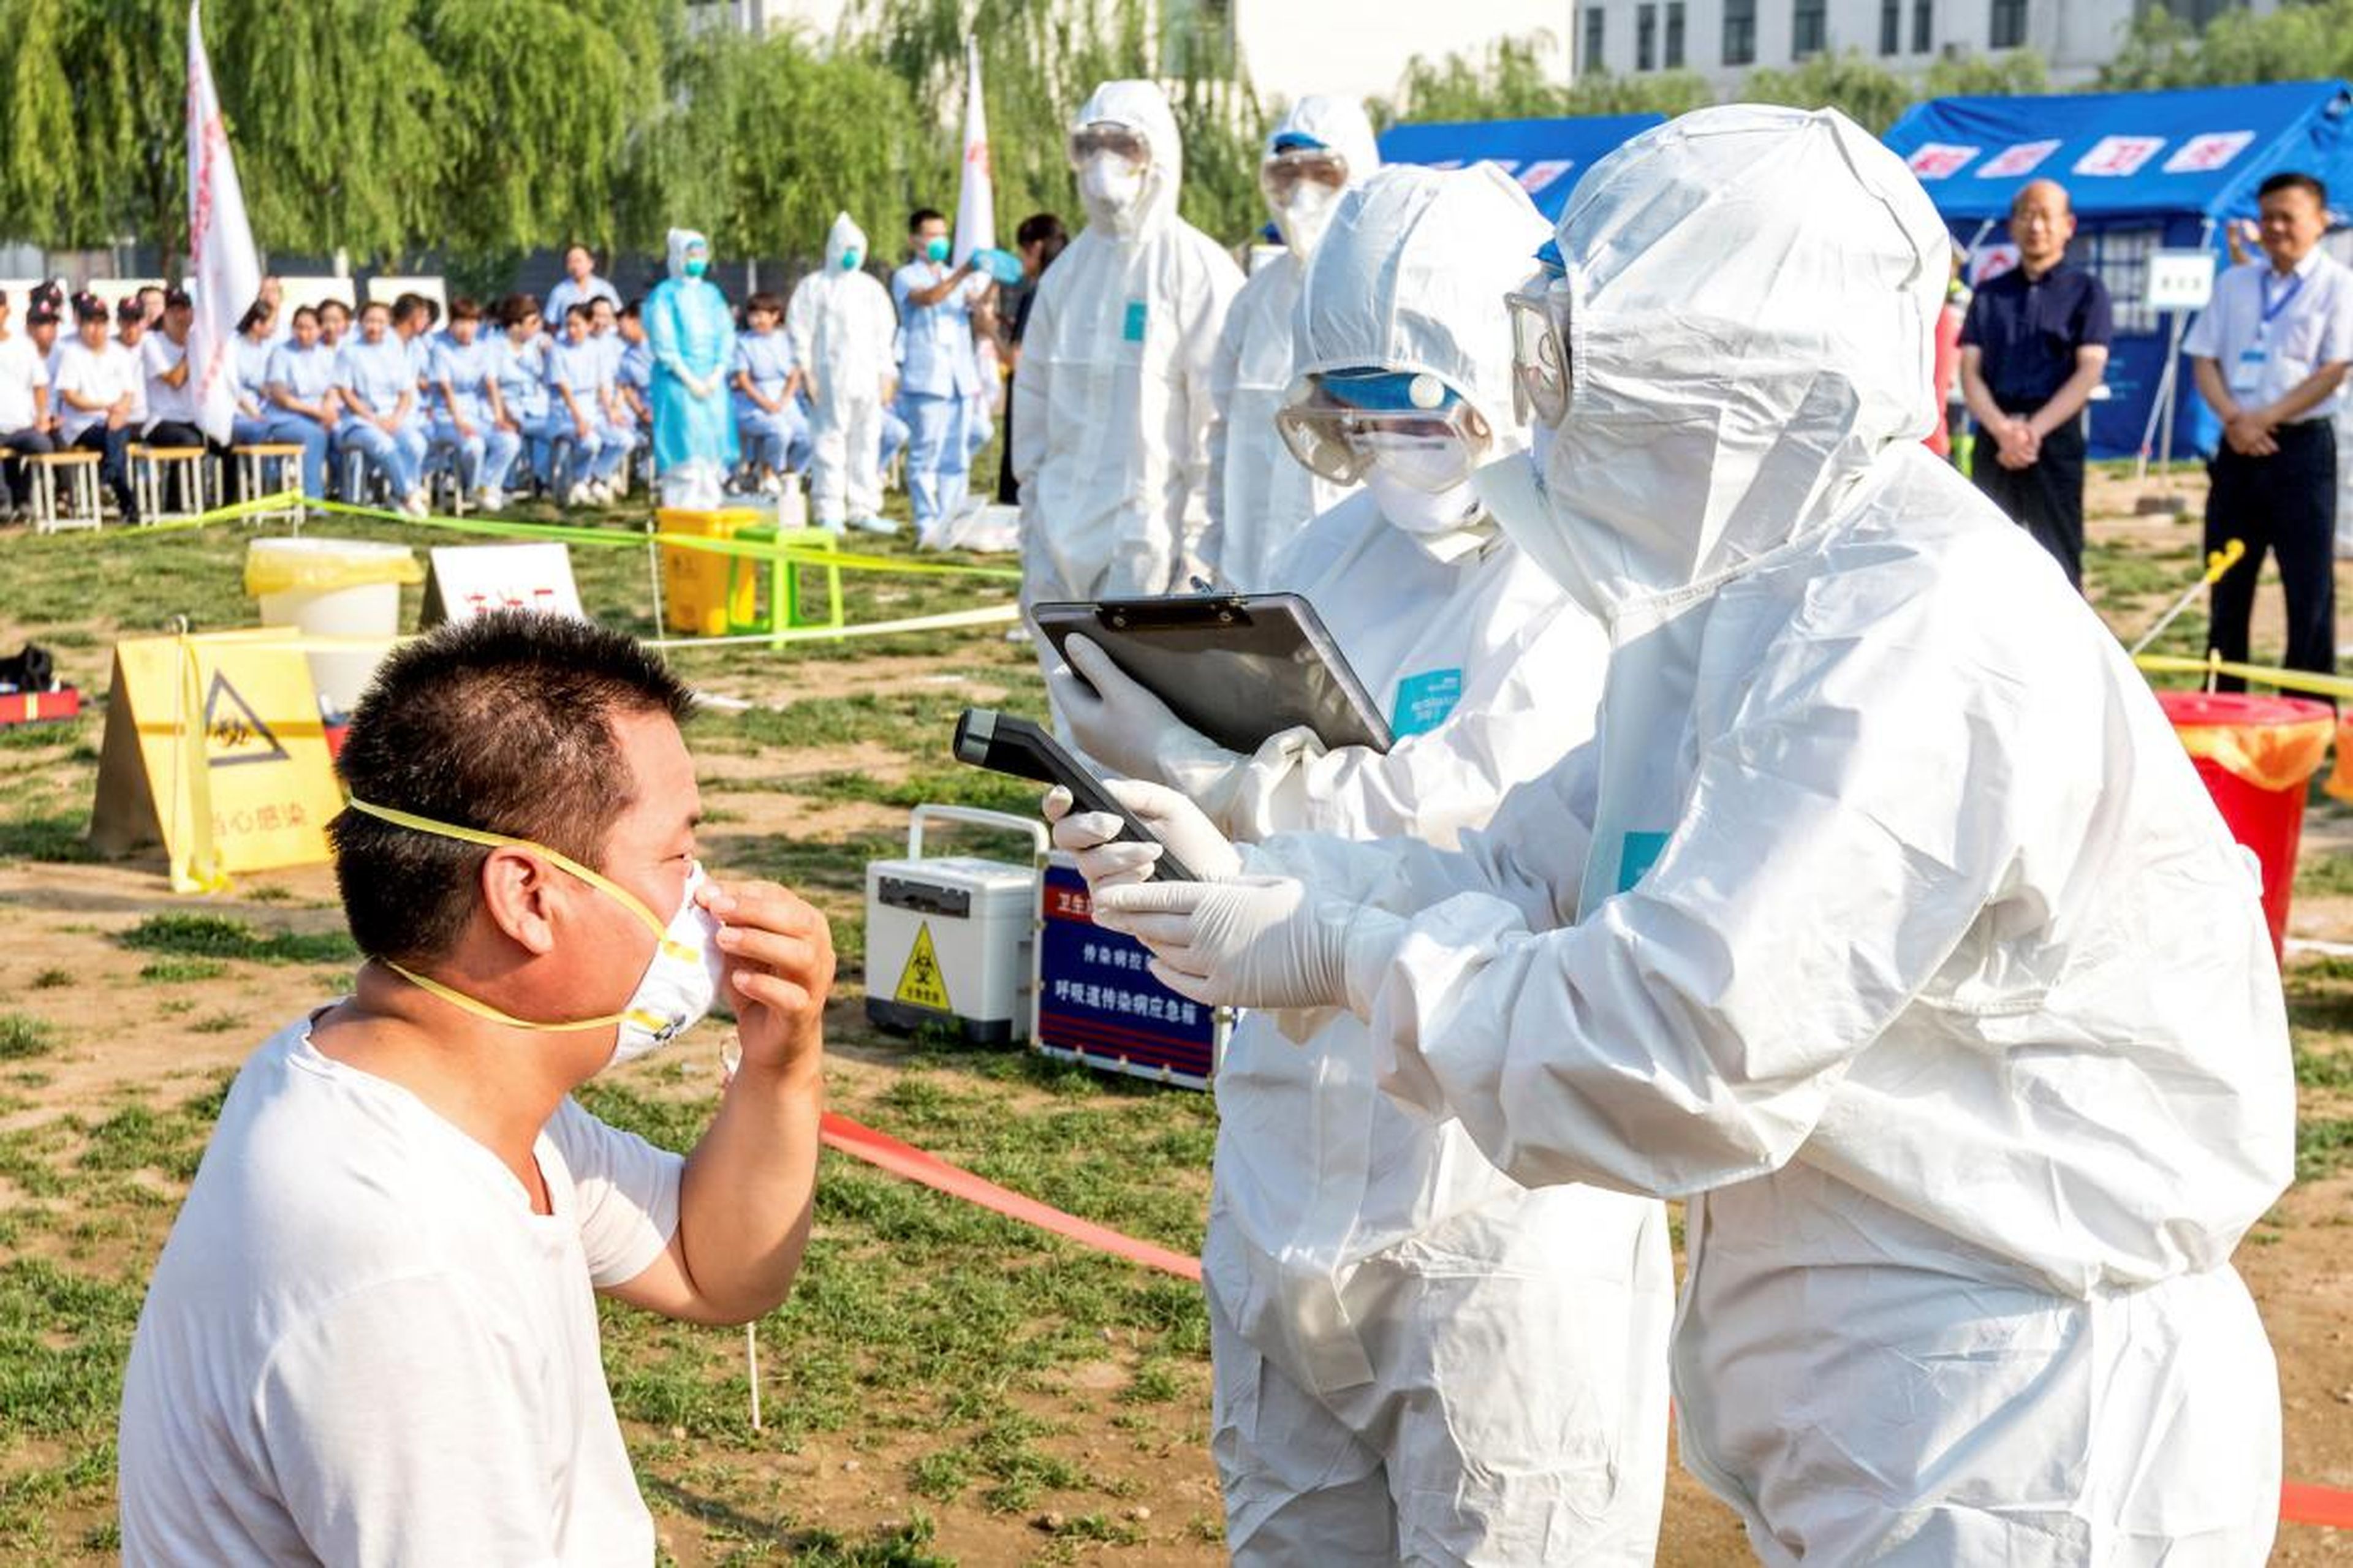 People participate in an emergency exercise on prevention and control of H7N9 bird flu virus organized by the local government in Hebi, Henan province, China, June 17, 2017.